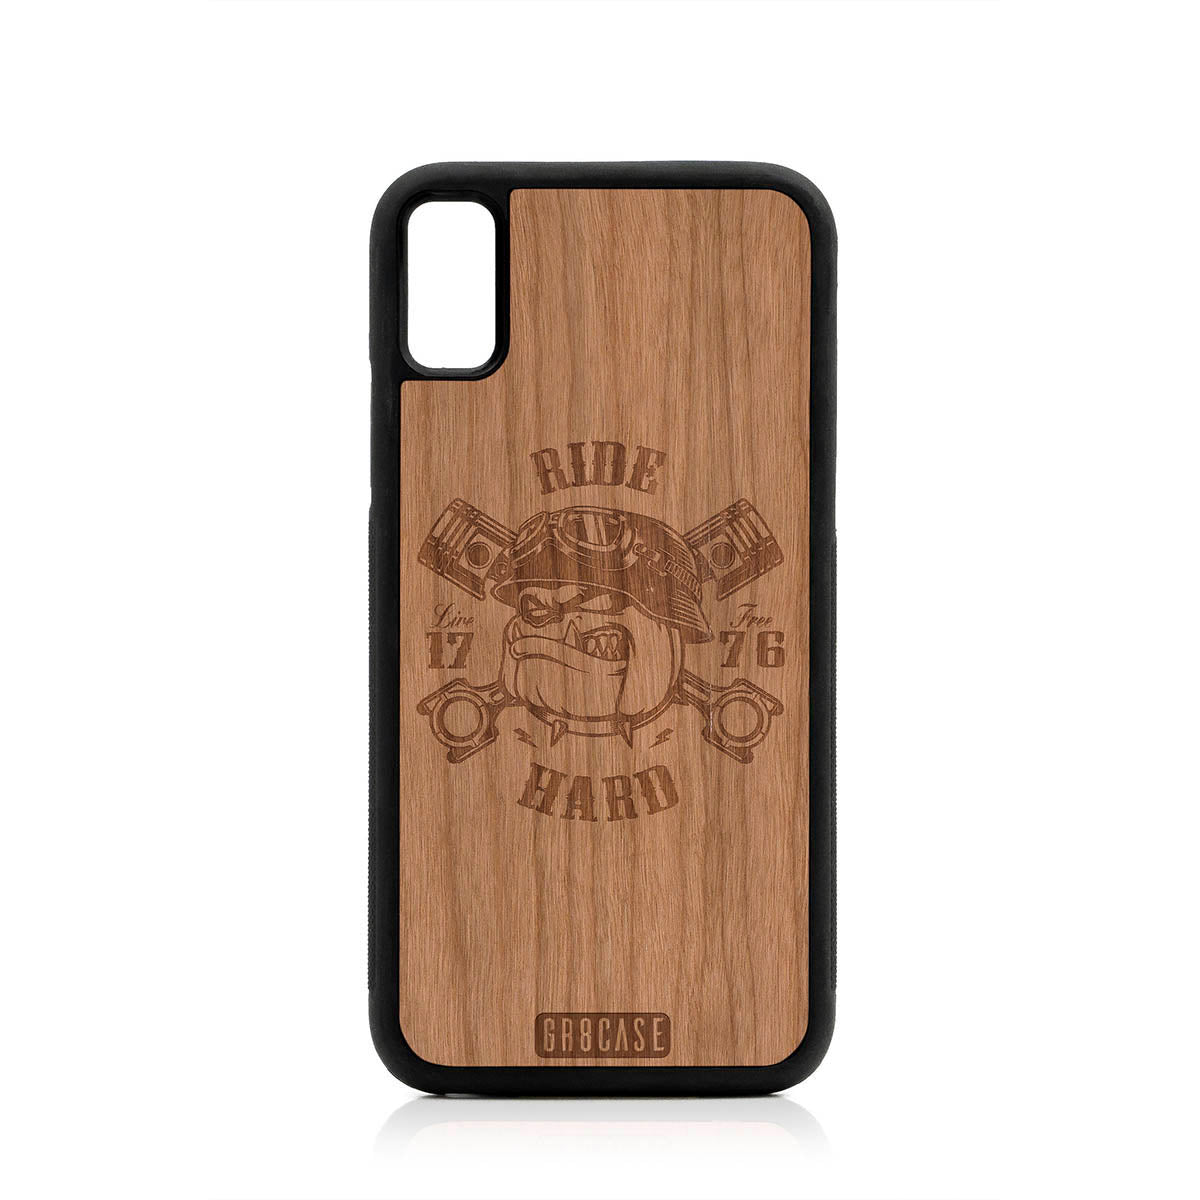 Ride Hard Live Free (Biker Dog) Design Wood Case For iPhone X/XS by GR8CASE